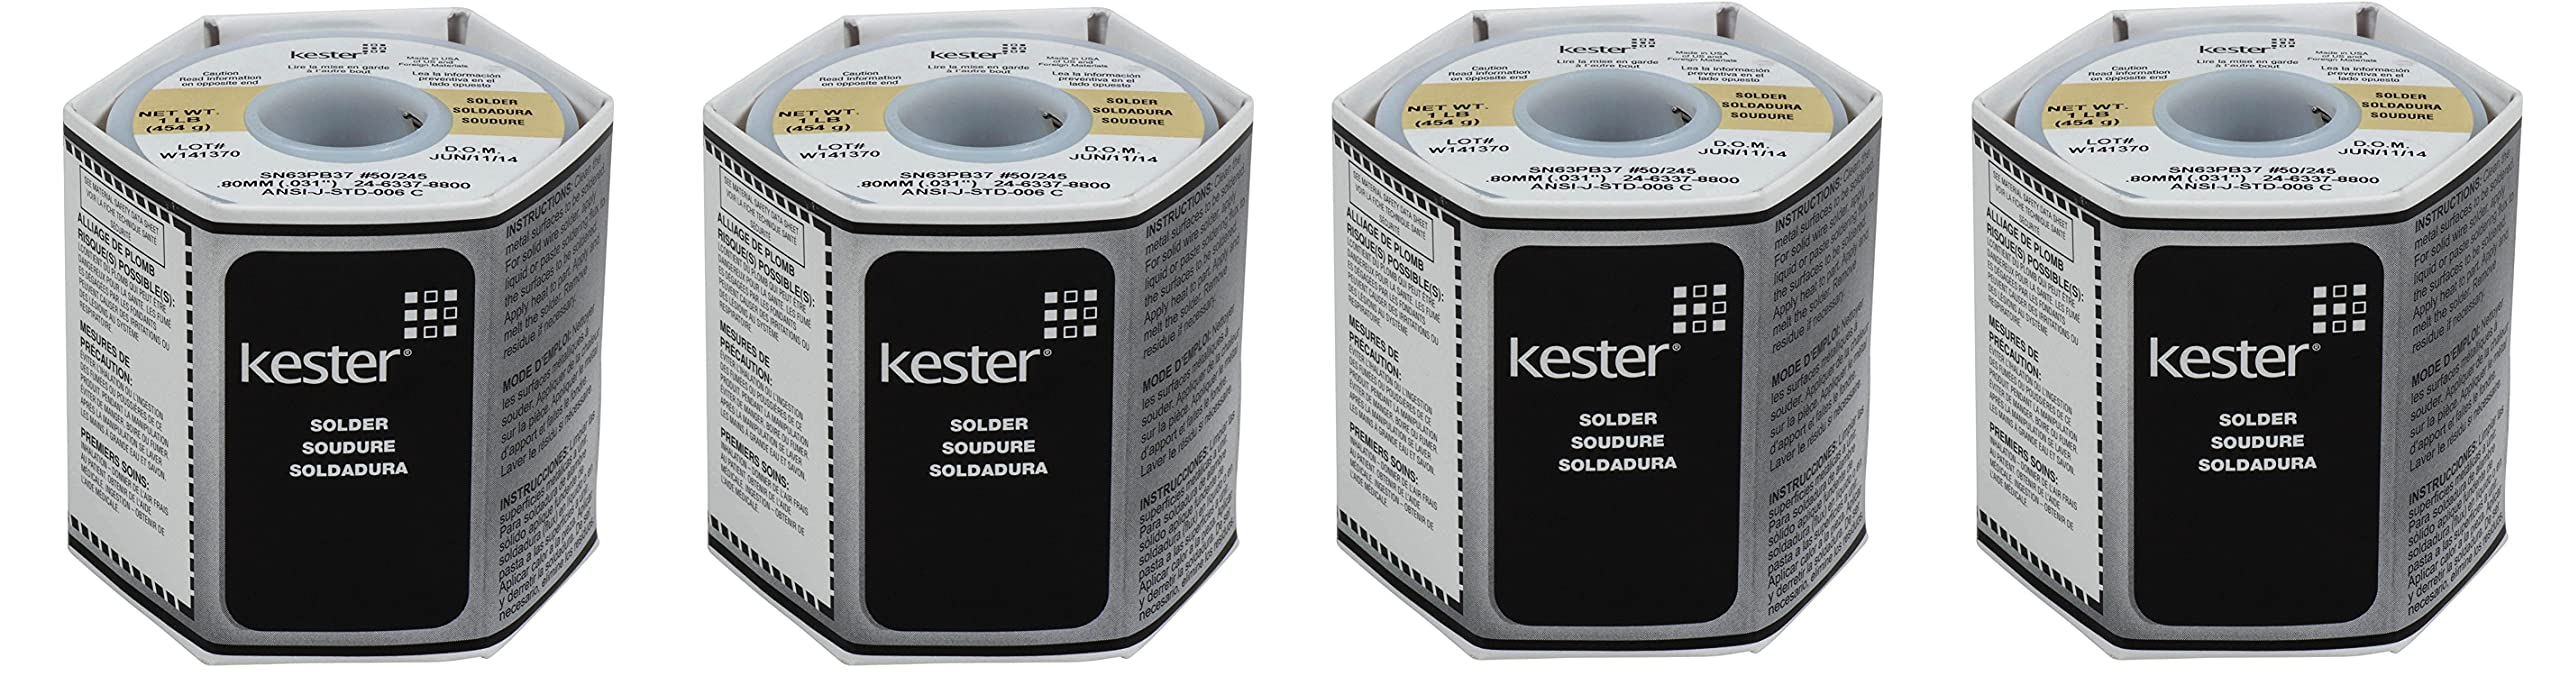 Kester 24-6337-8800 50 Activated Rosin Cored Wire Solder Roll, 245 No-Clean, 63/37 Alloy, 0.031" Diameter (1, F?ur ???k)